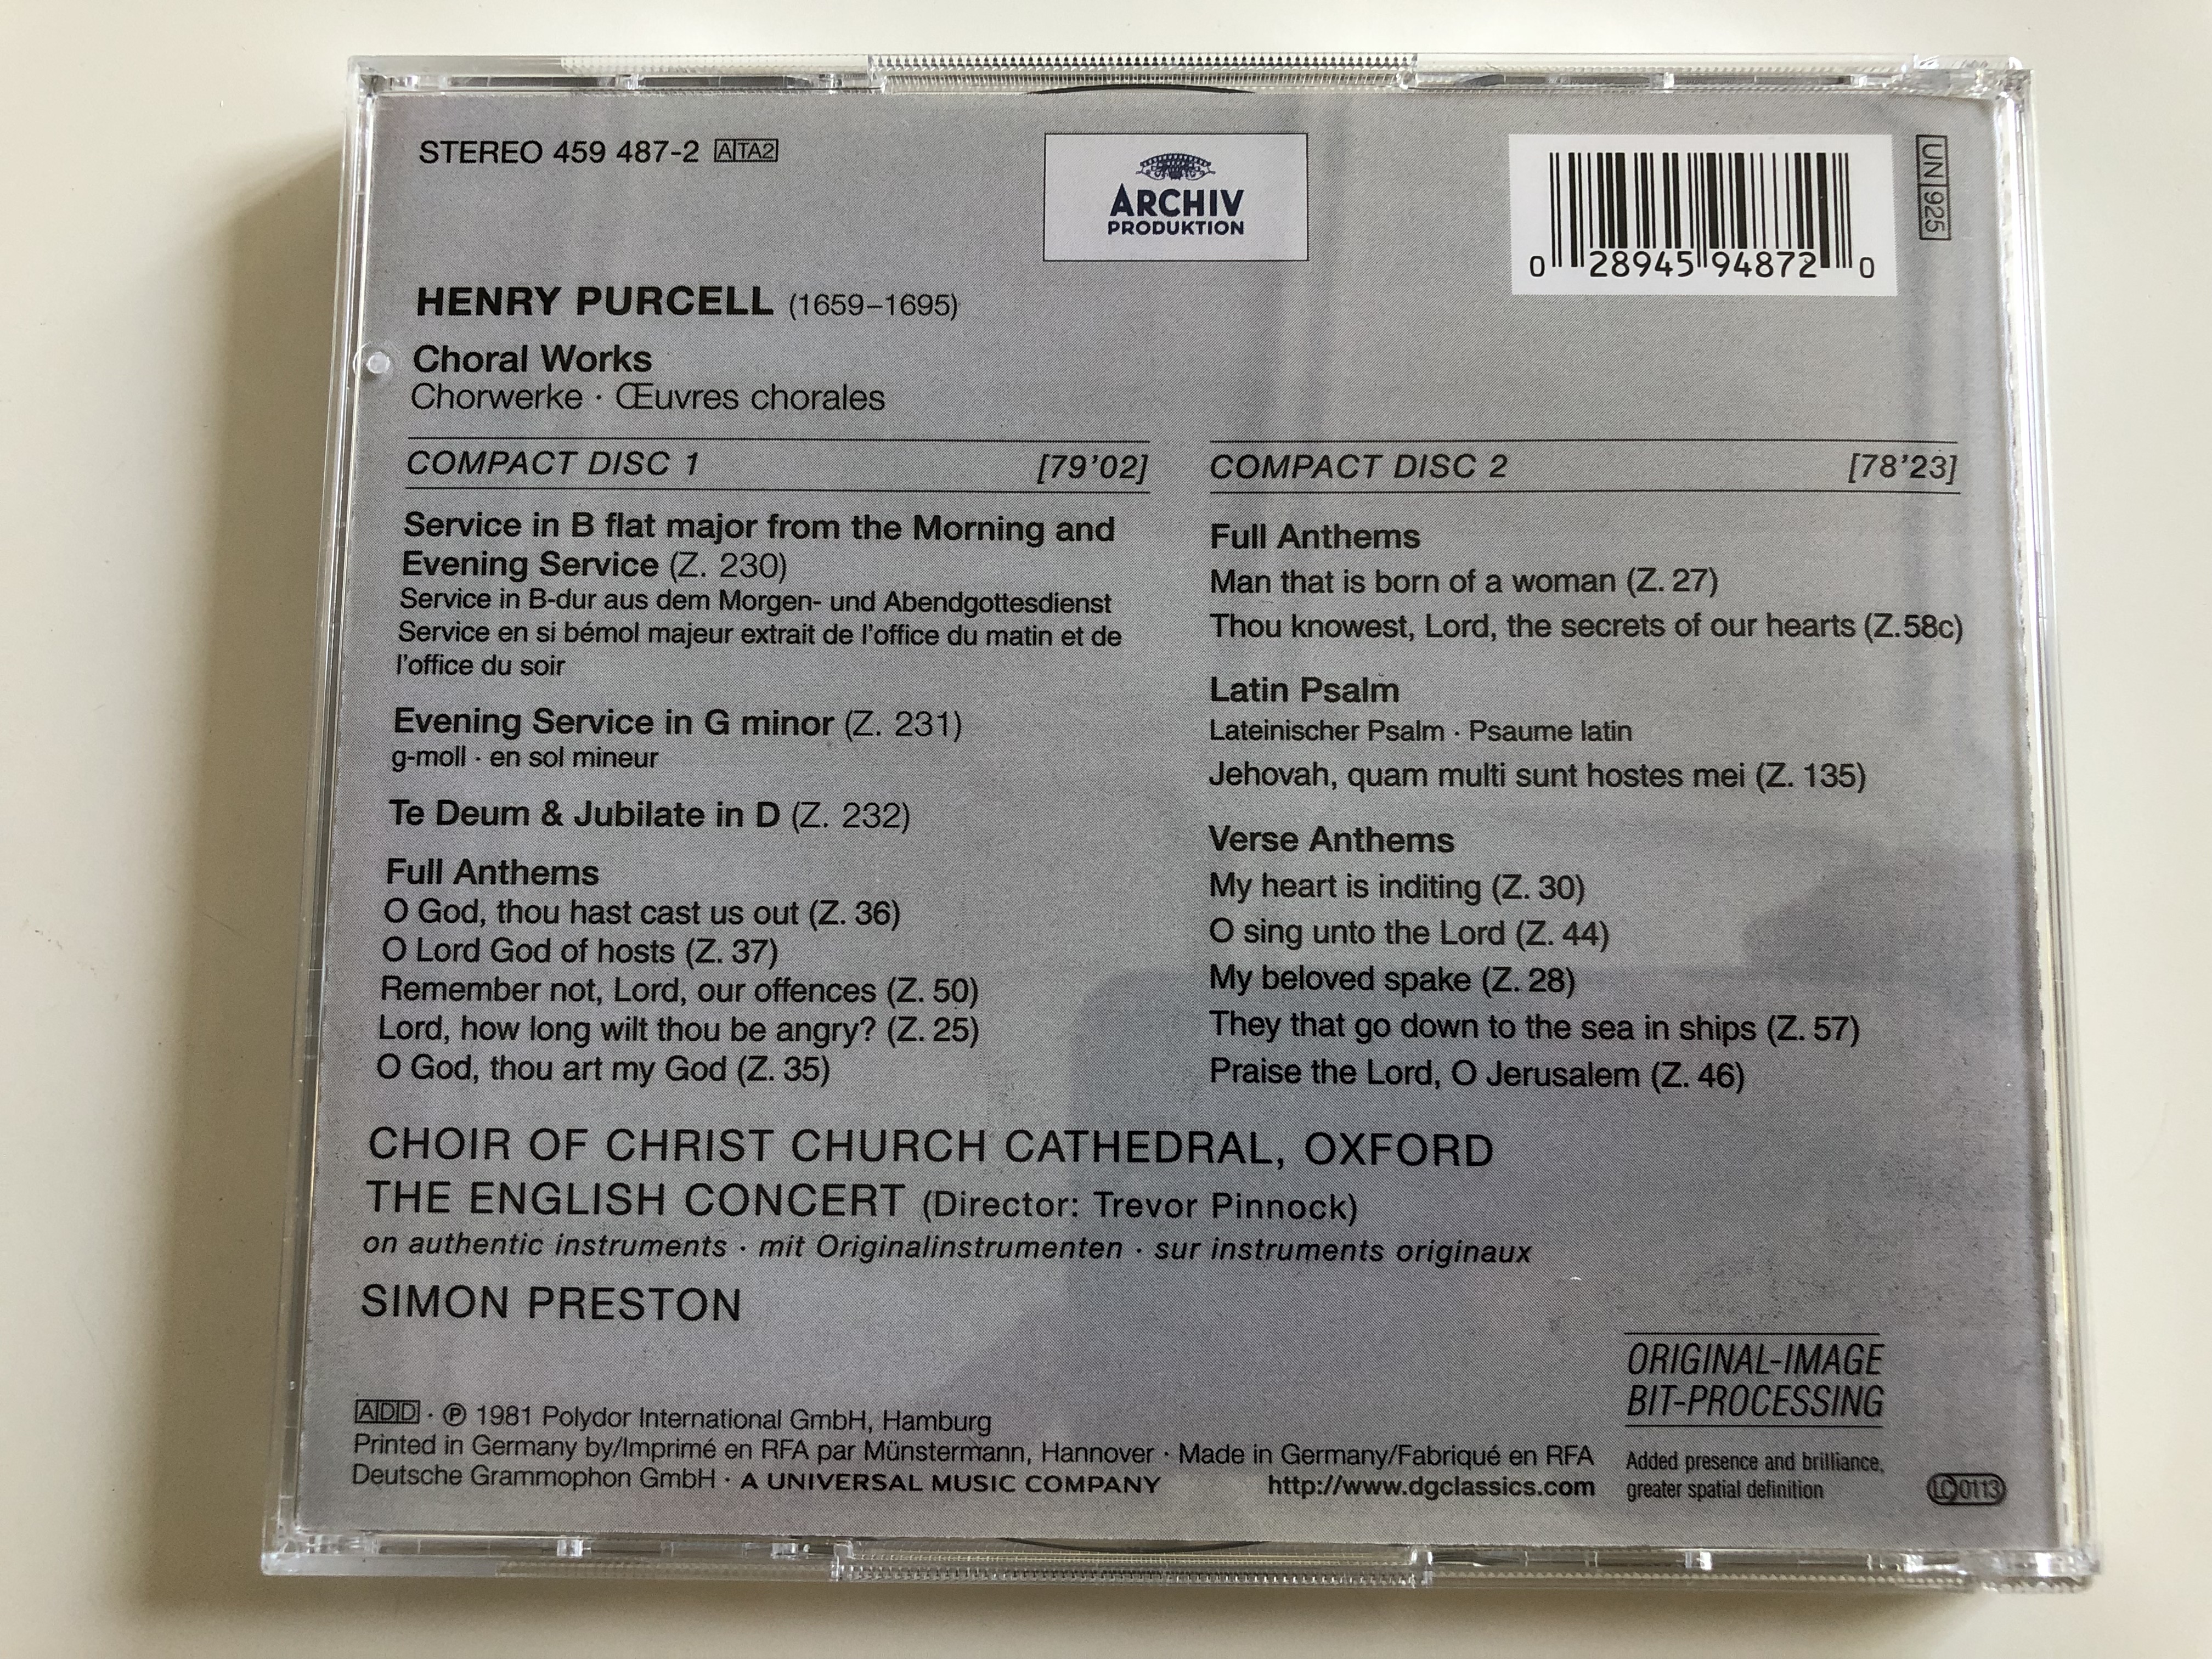 purcell-choral-works-choir-of-christ-church-cathedral-oxford-the-english-concert-conducted-by-simon-preston-2x-audio-cd-1981-polydor-459-487-2-8-.jpg